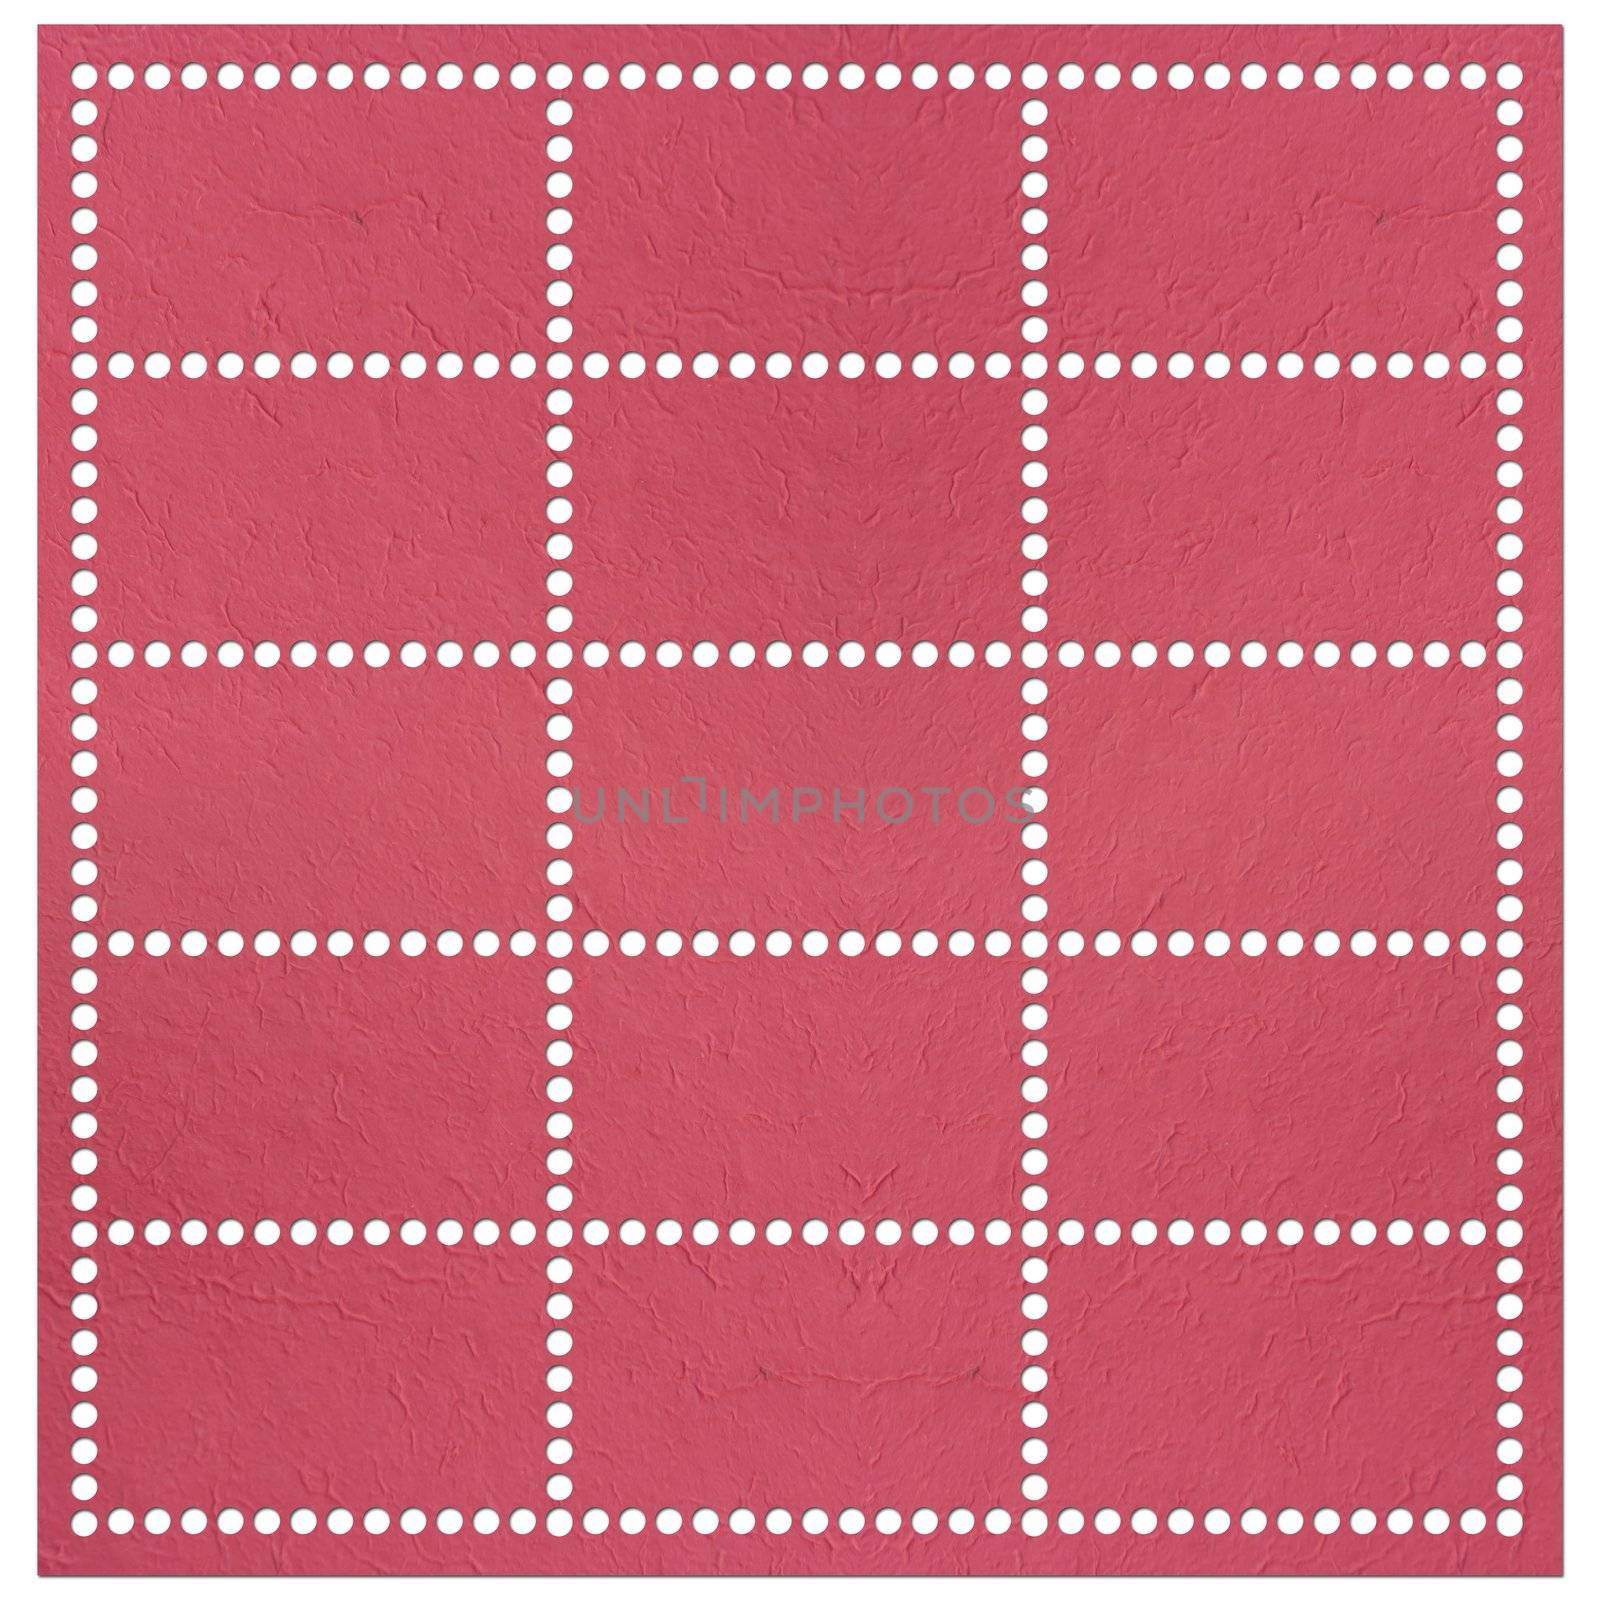 Set of stamps tempate mulberry paper isolated.